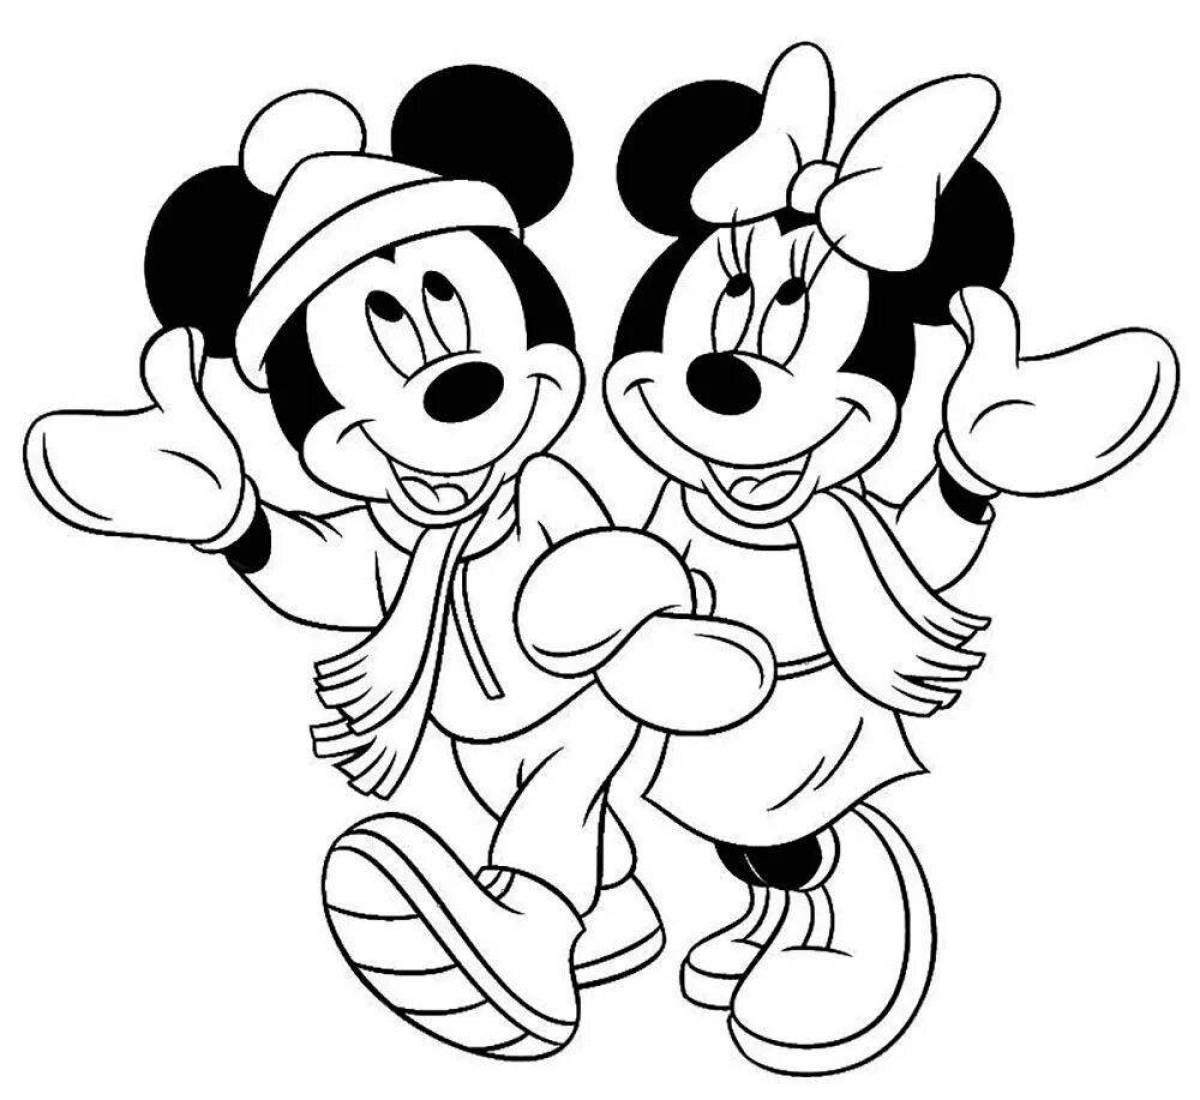 Mickey Mouse and Minnie Mouse #13